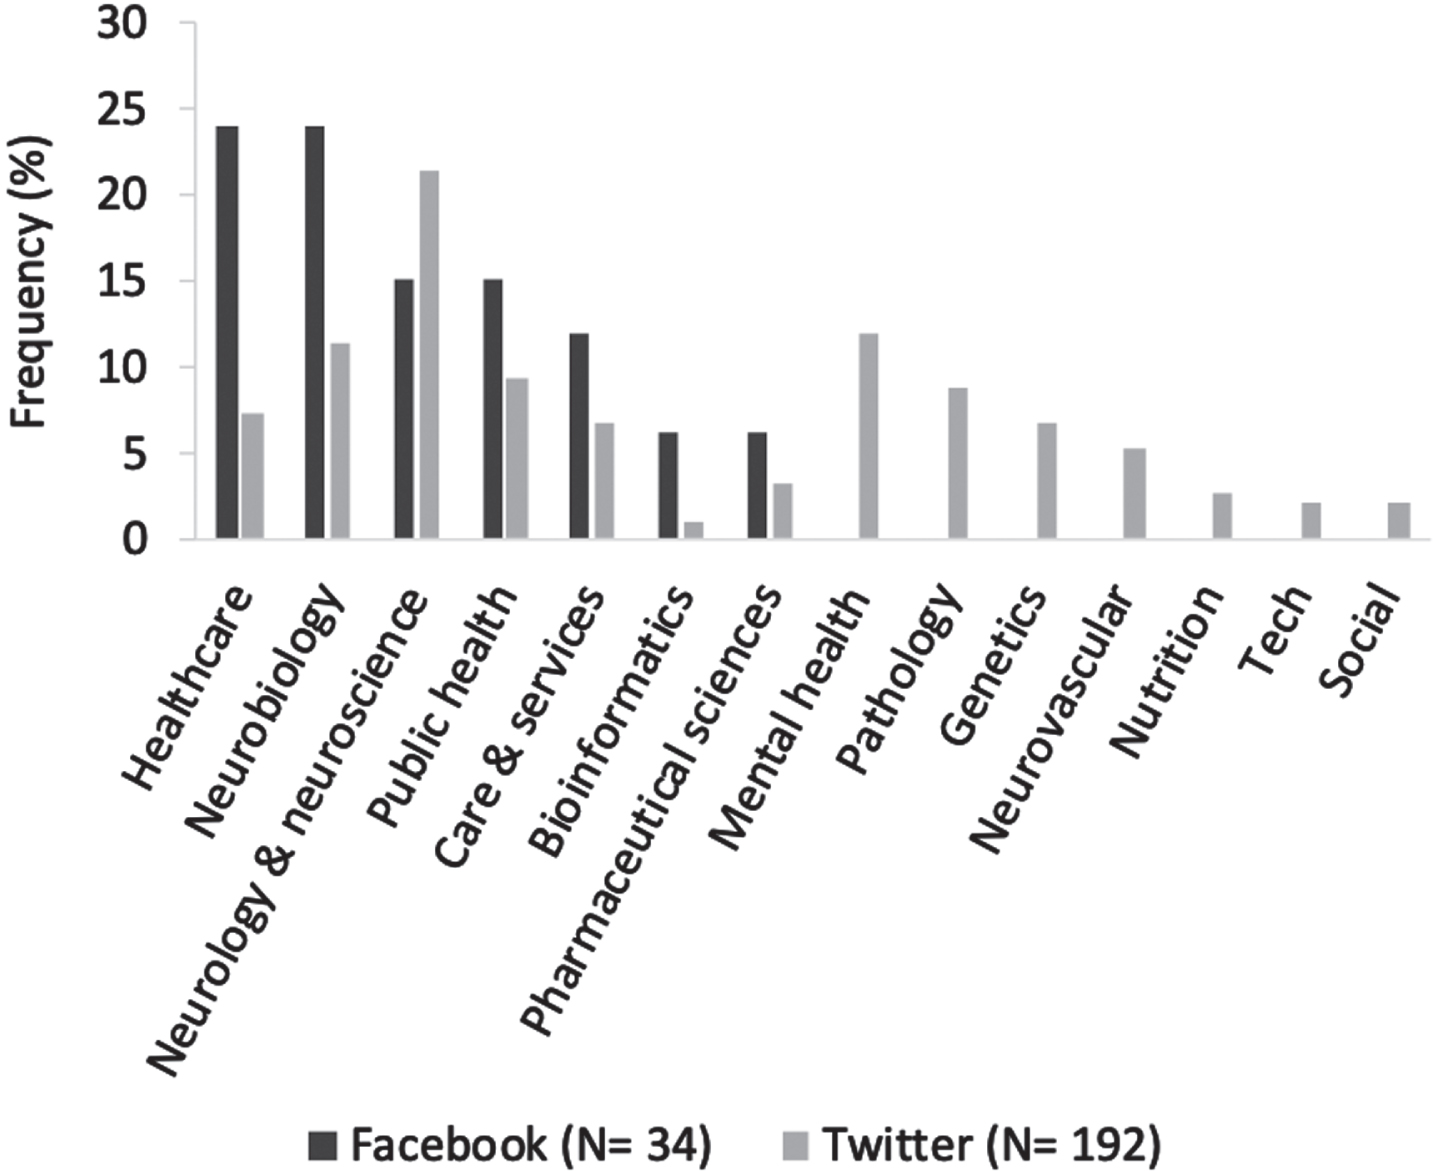 Dementia journal articles. Percentage of dementia research fields for journal articles on Facebook and Twitter. Percentages for each field are of a total of the N codes indicated for each platform.